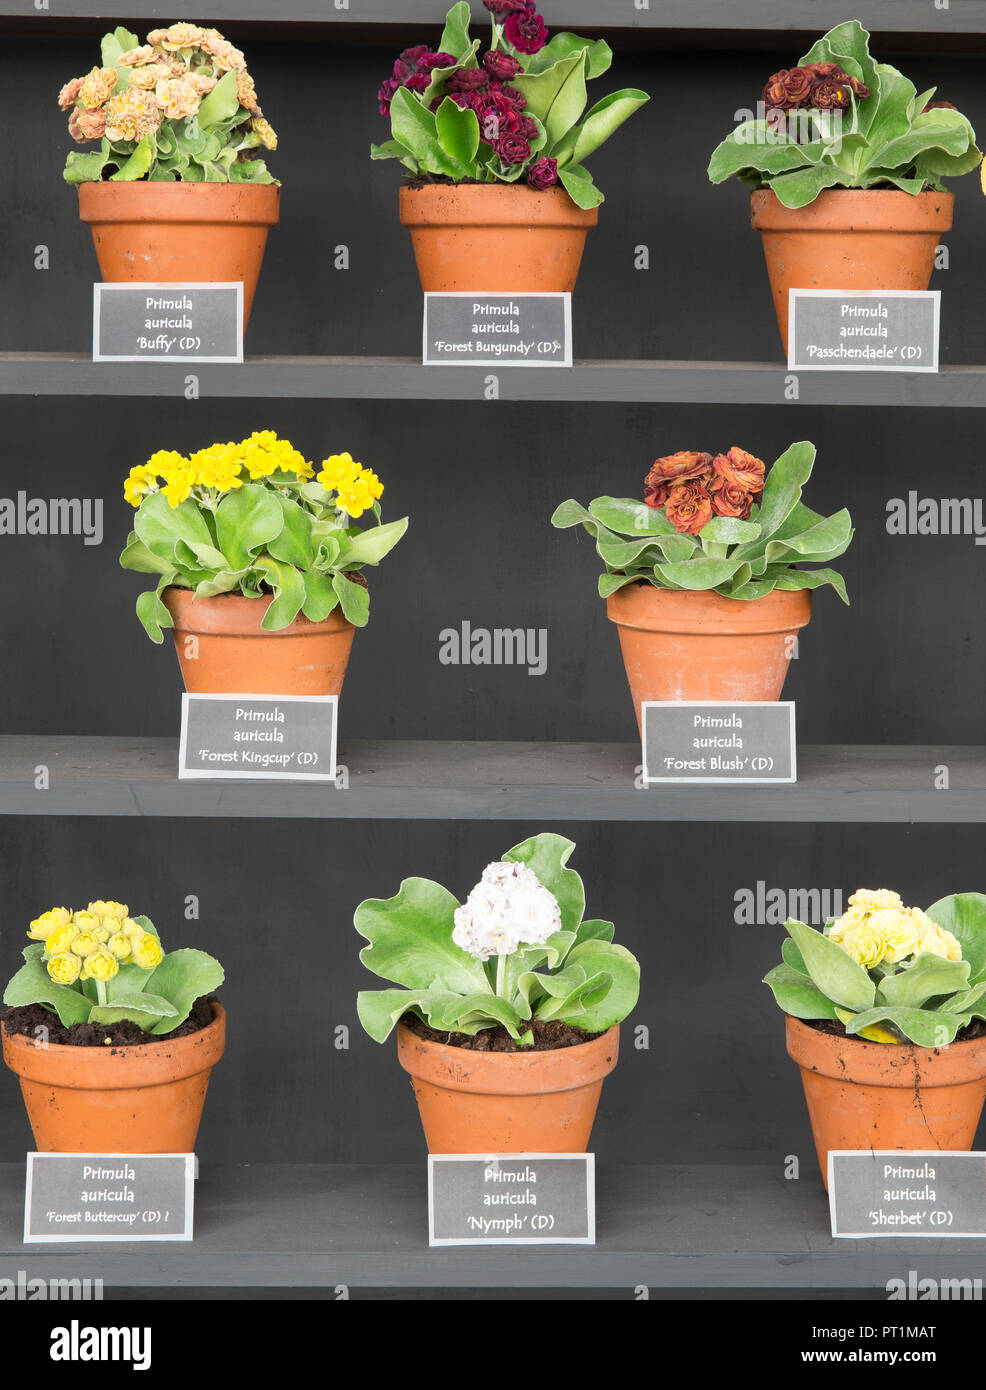 Black wooden shelves with Primula auricula theatre display, terracotta plant pots Stock Photo